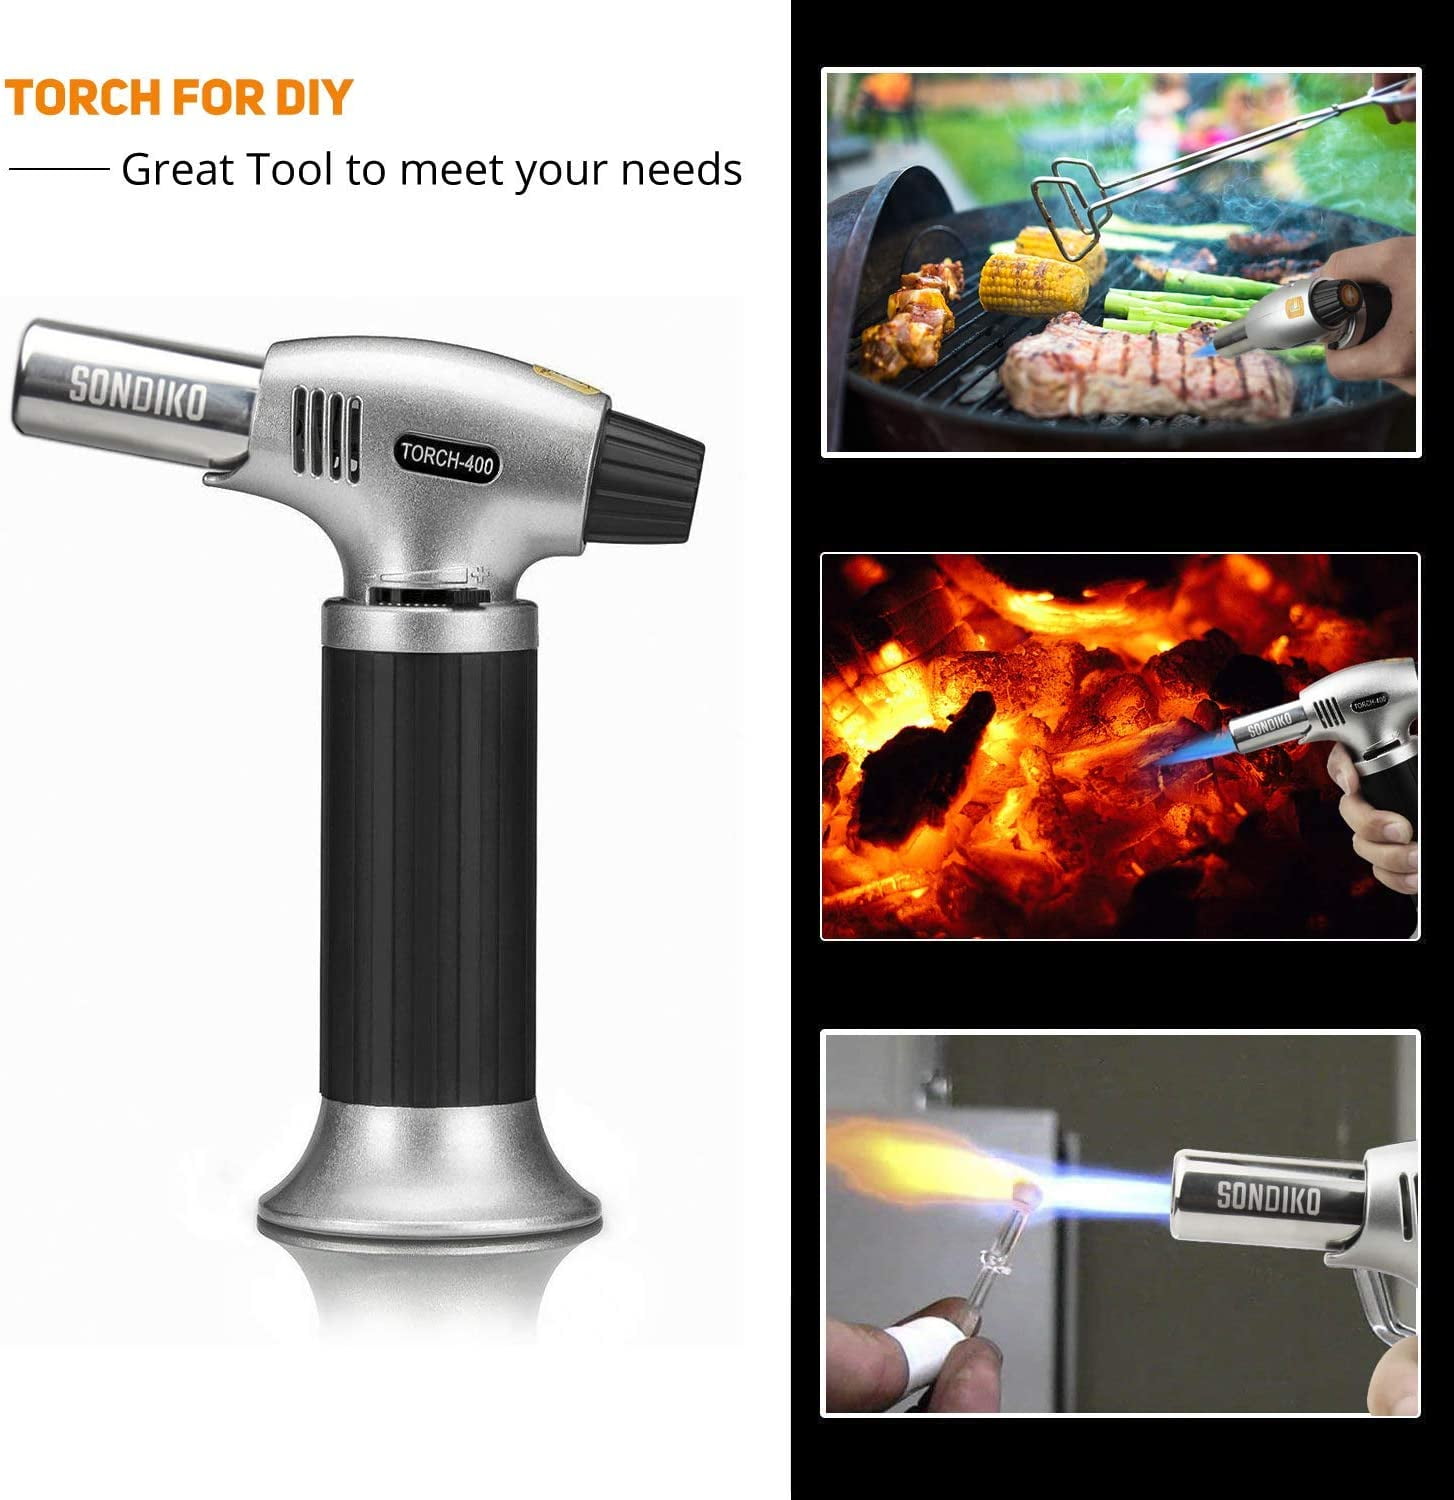 Creme Brulee Baking DIY Soldering Refillable Butane Torch Lighter with Safety Lock&Adjustable Flame Blow Torch for BBQ Sondiko Kitchen Torch Butane Gas not Included 